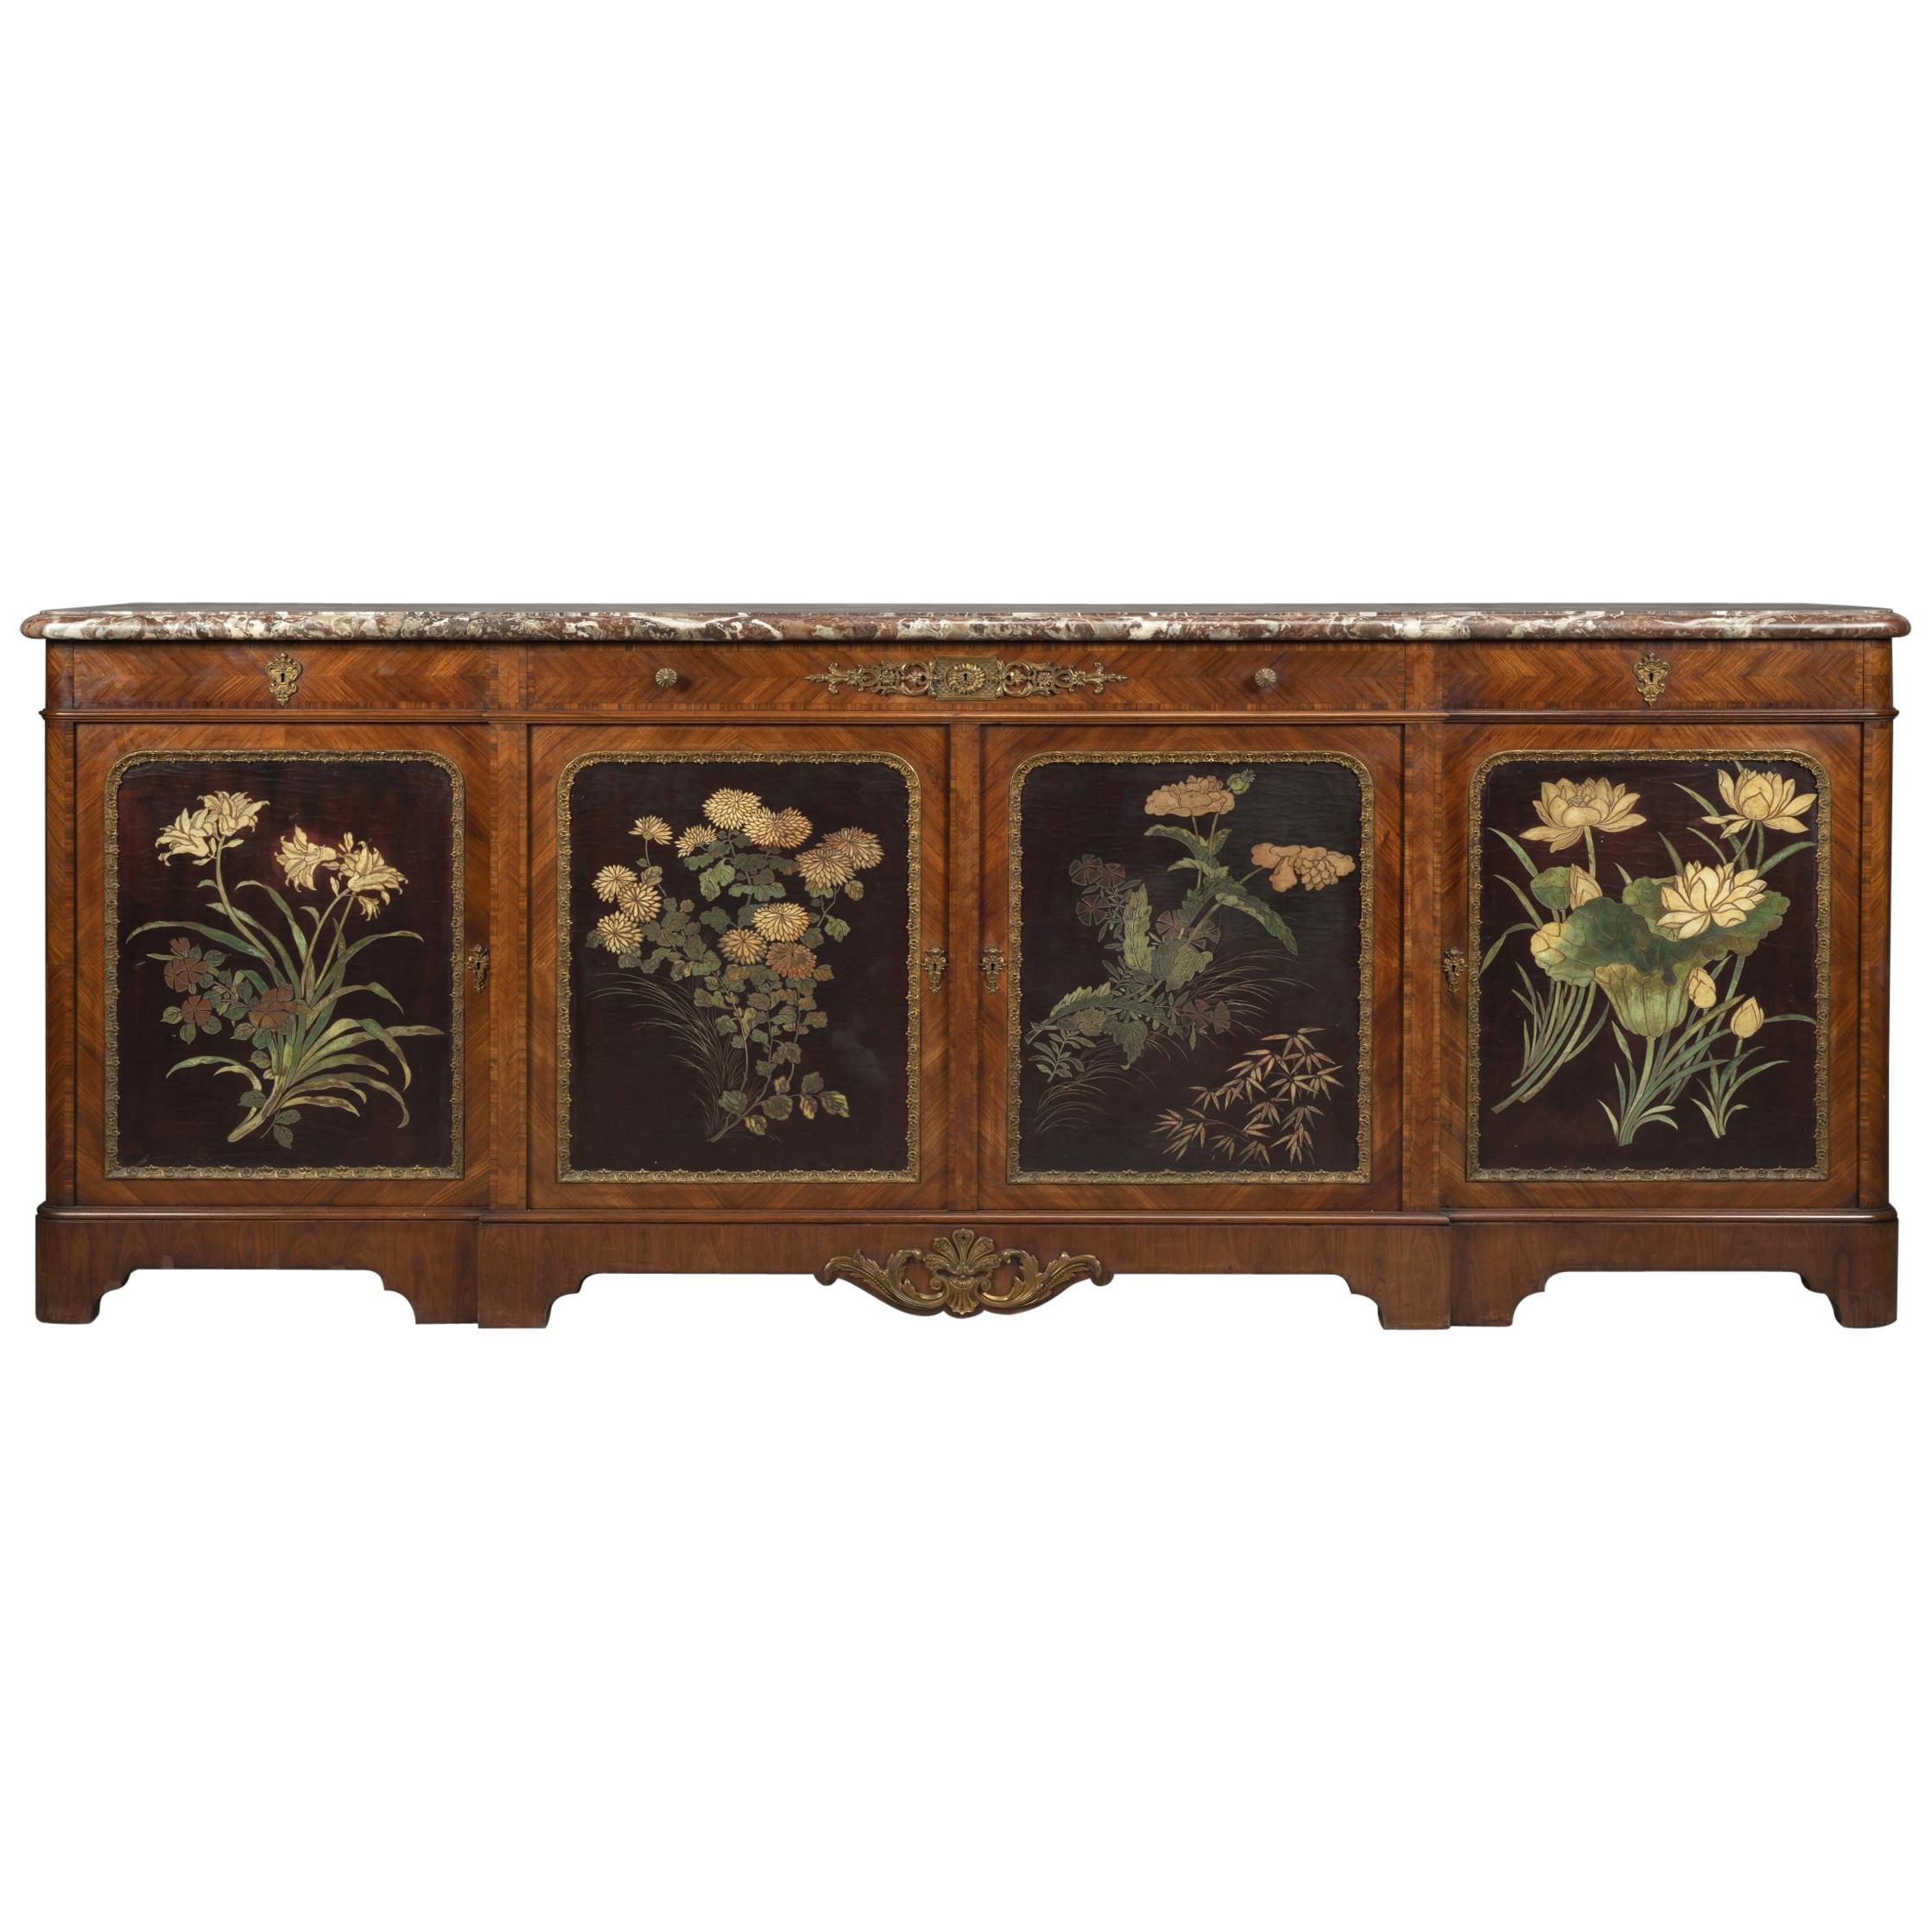 Régence Style Side Cabinet with Lacquer Panels Attributed to Paul Sormani c 1890 For Sale